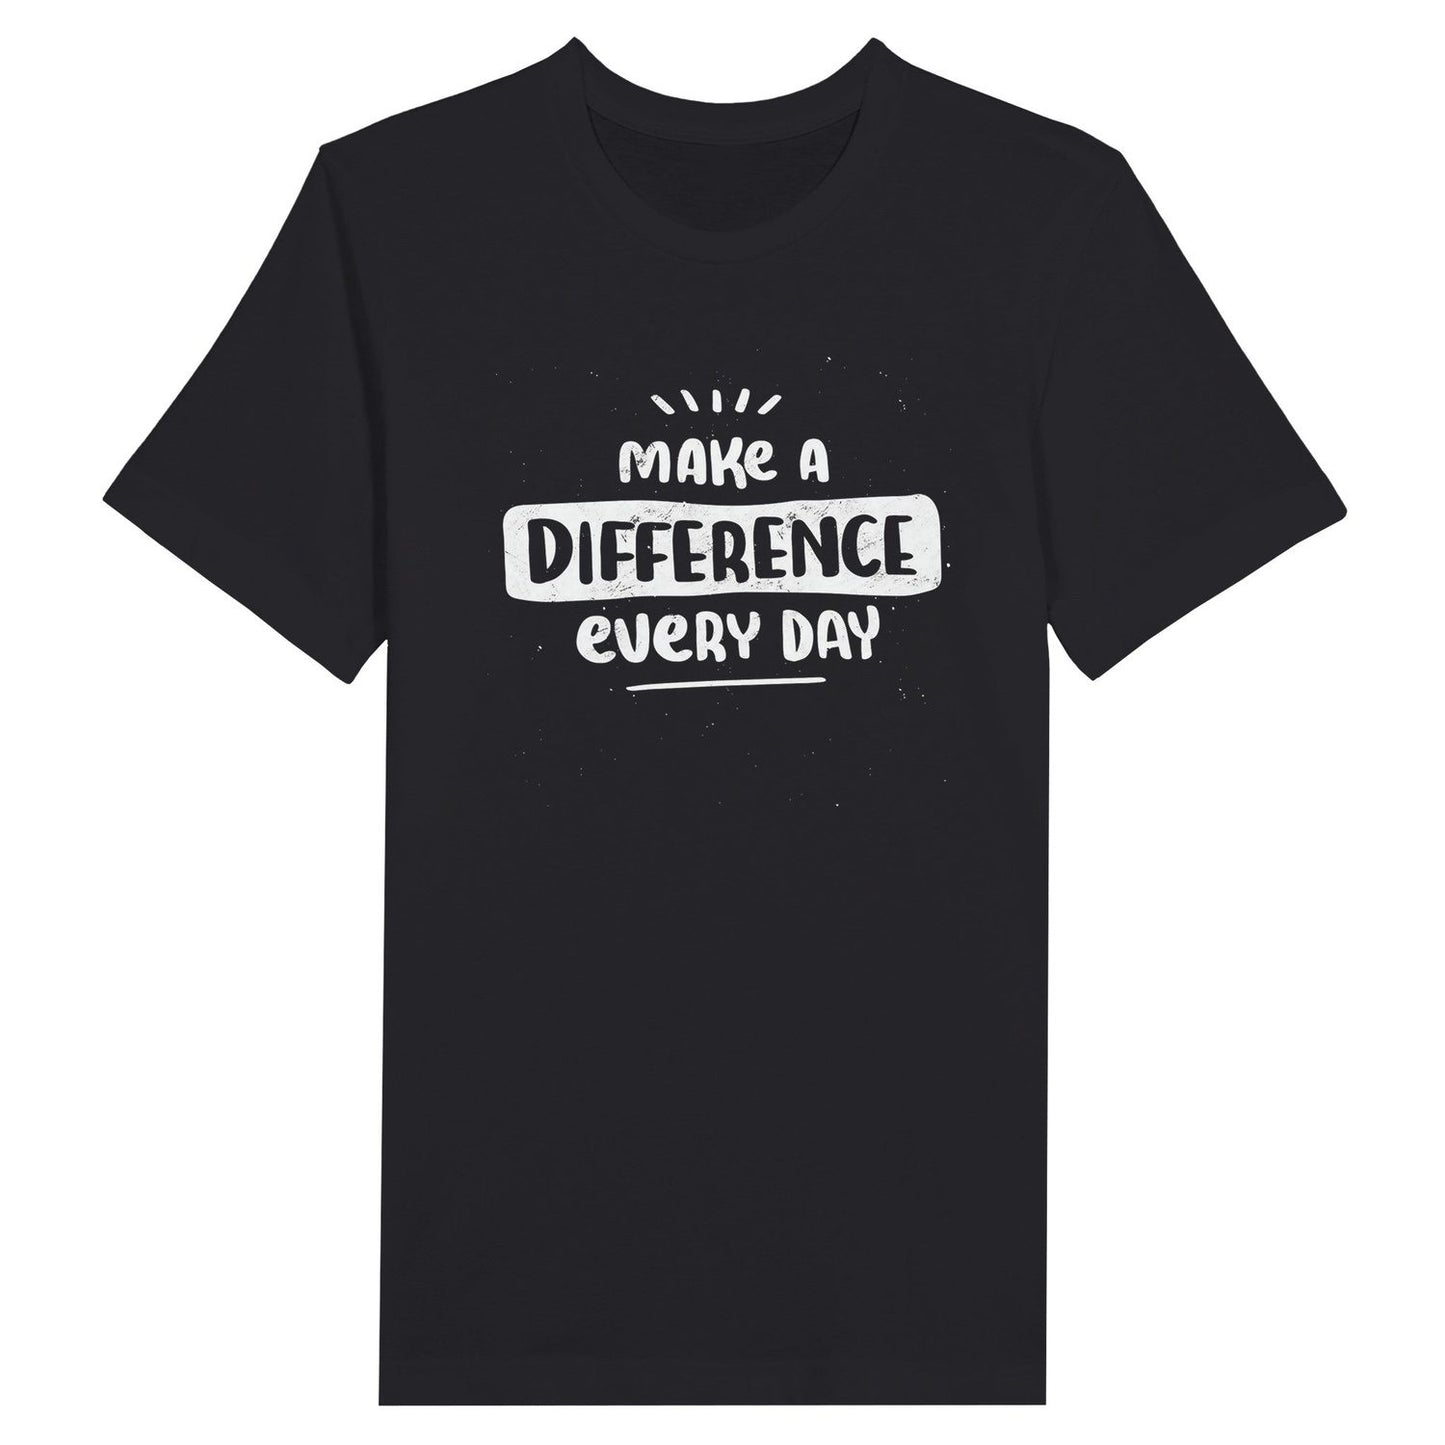 An image of Make a Difference Everyday | Premium Unisex Inspirational T-shirt available at 3rd Day Christian Clothing UK